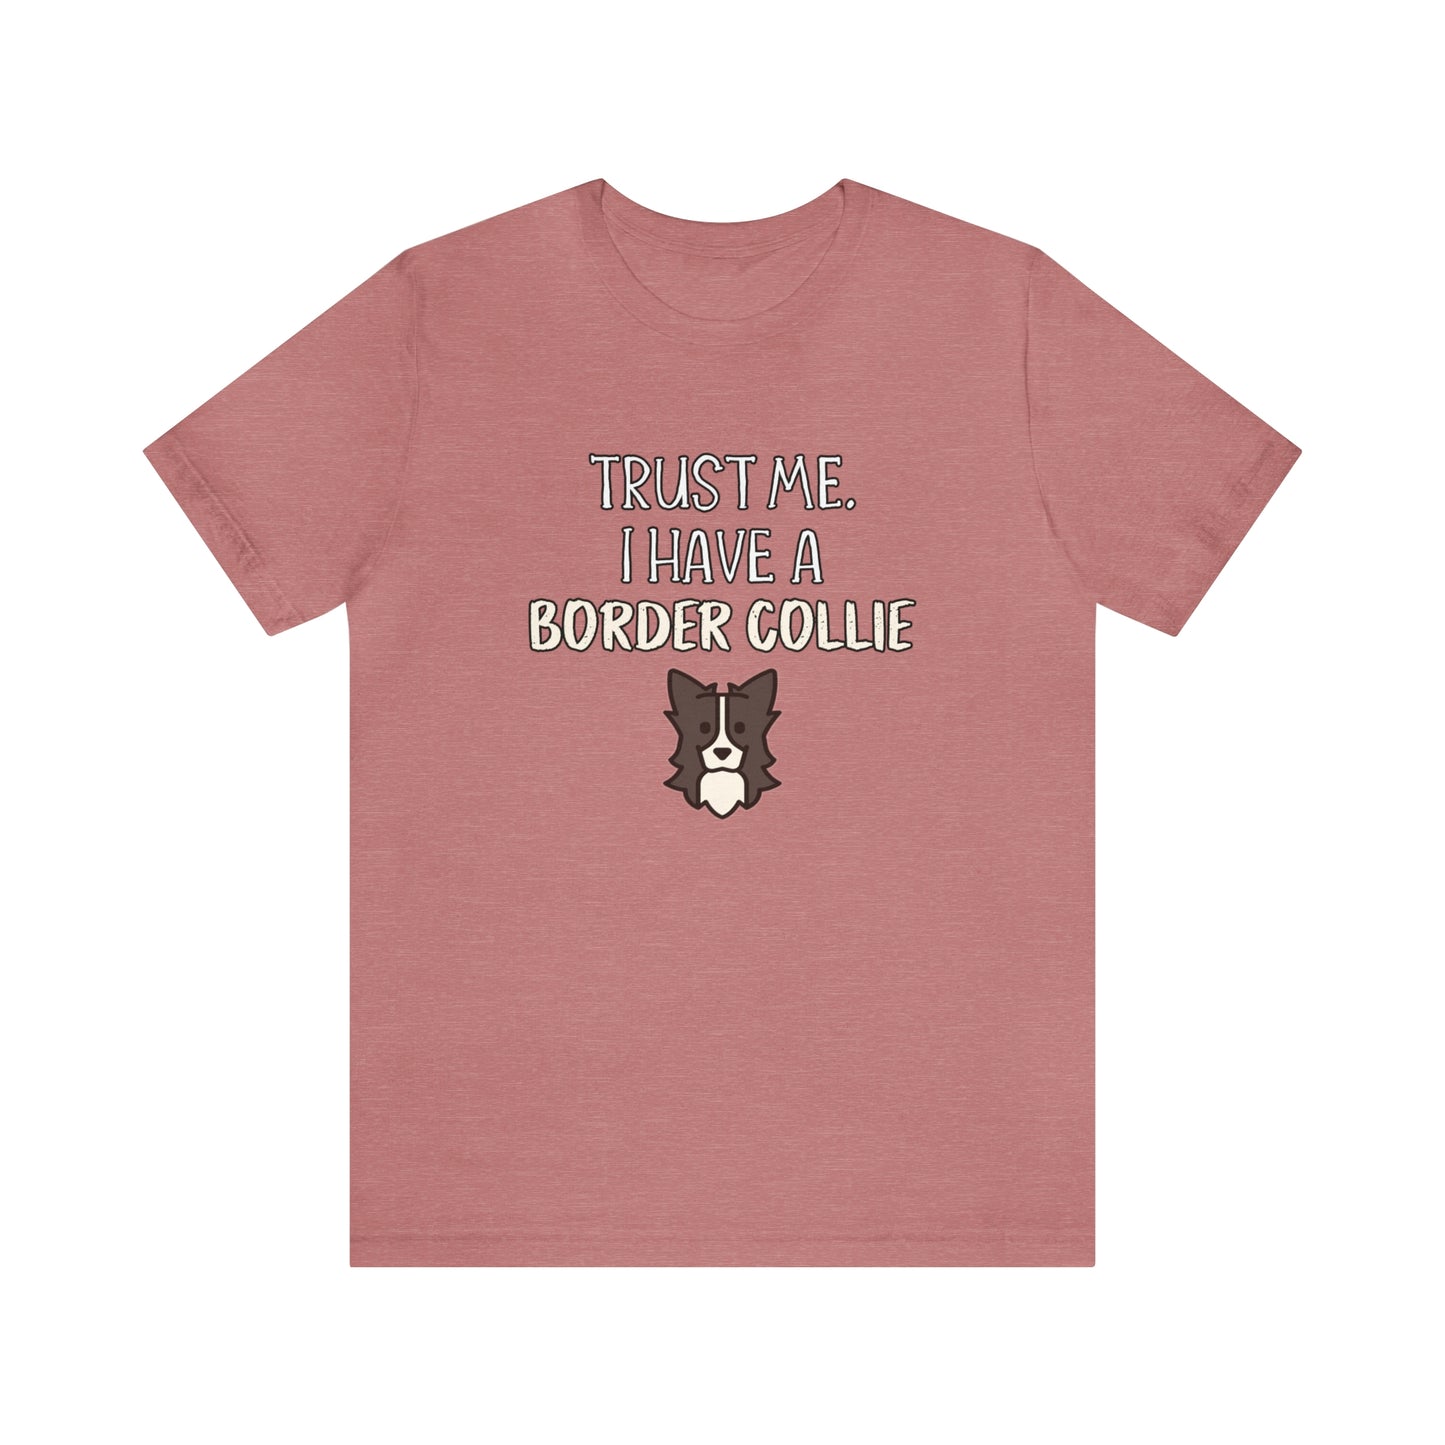 border collie t shirt red